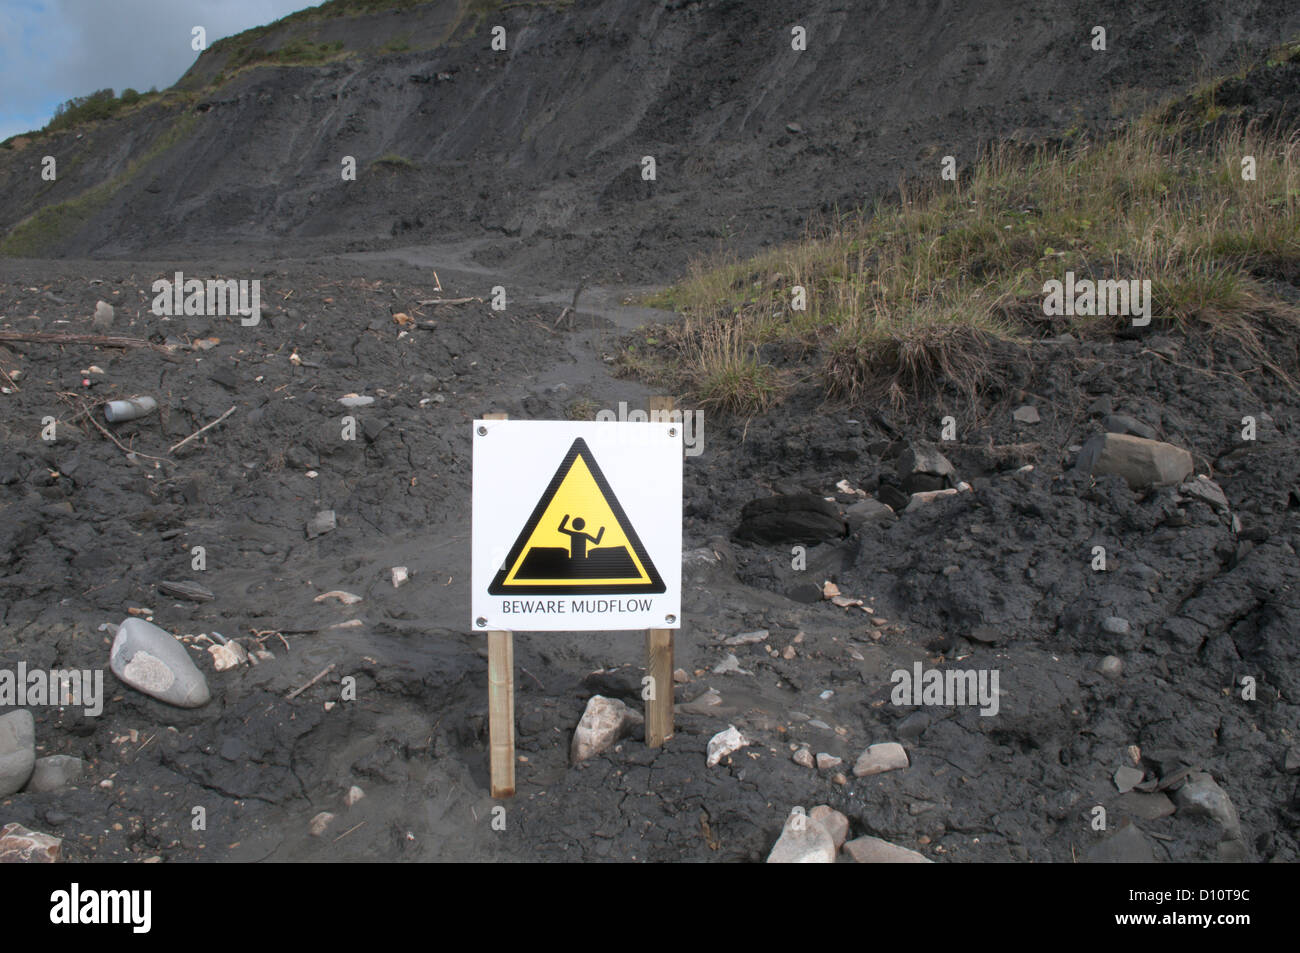 Mudflow from unstable cliffs around Charmouth and Lyme Regis, Dorset/Devon border, UK. Fossil rich coast and shoreline. July. Stock Photo